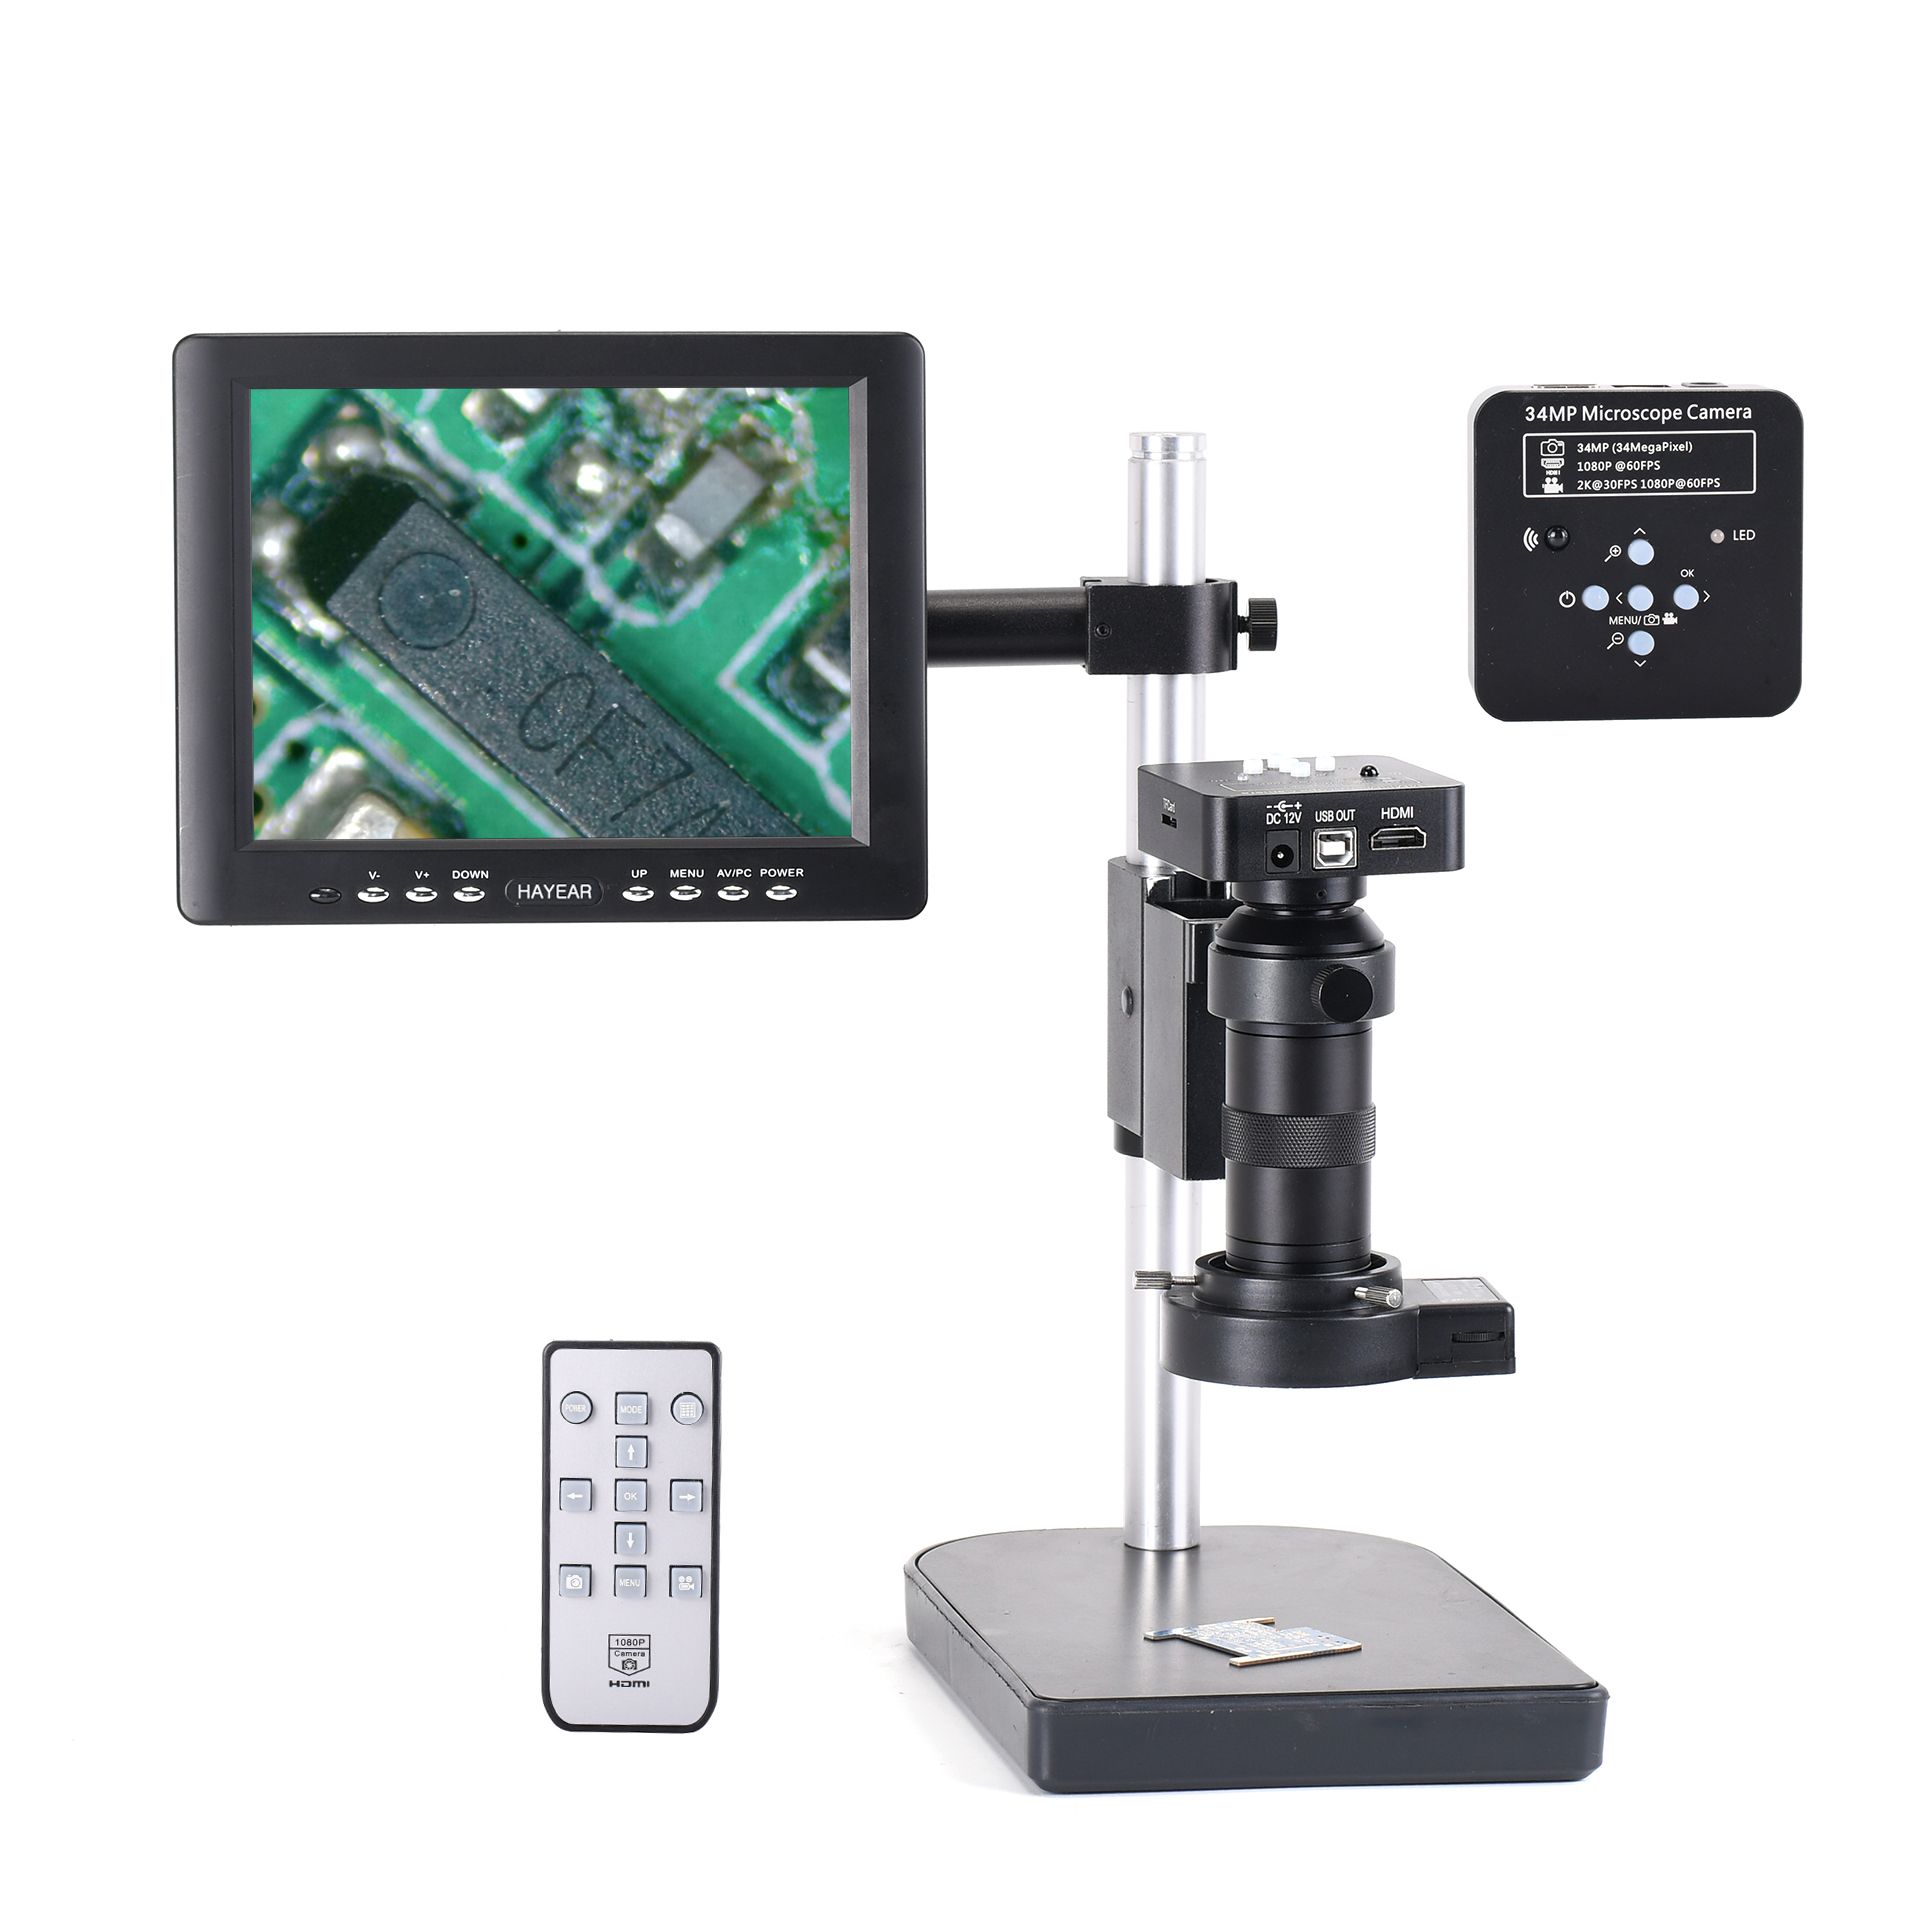 HAYEAR-34mpMP-Industrial-Microscope-Camera-Kit-HDMI-USB-100X-C-mount-Zoom-Lens-60-LED-Light-with-8qu-1615301